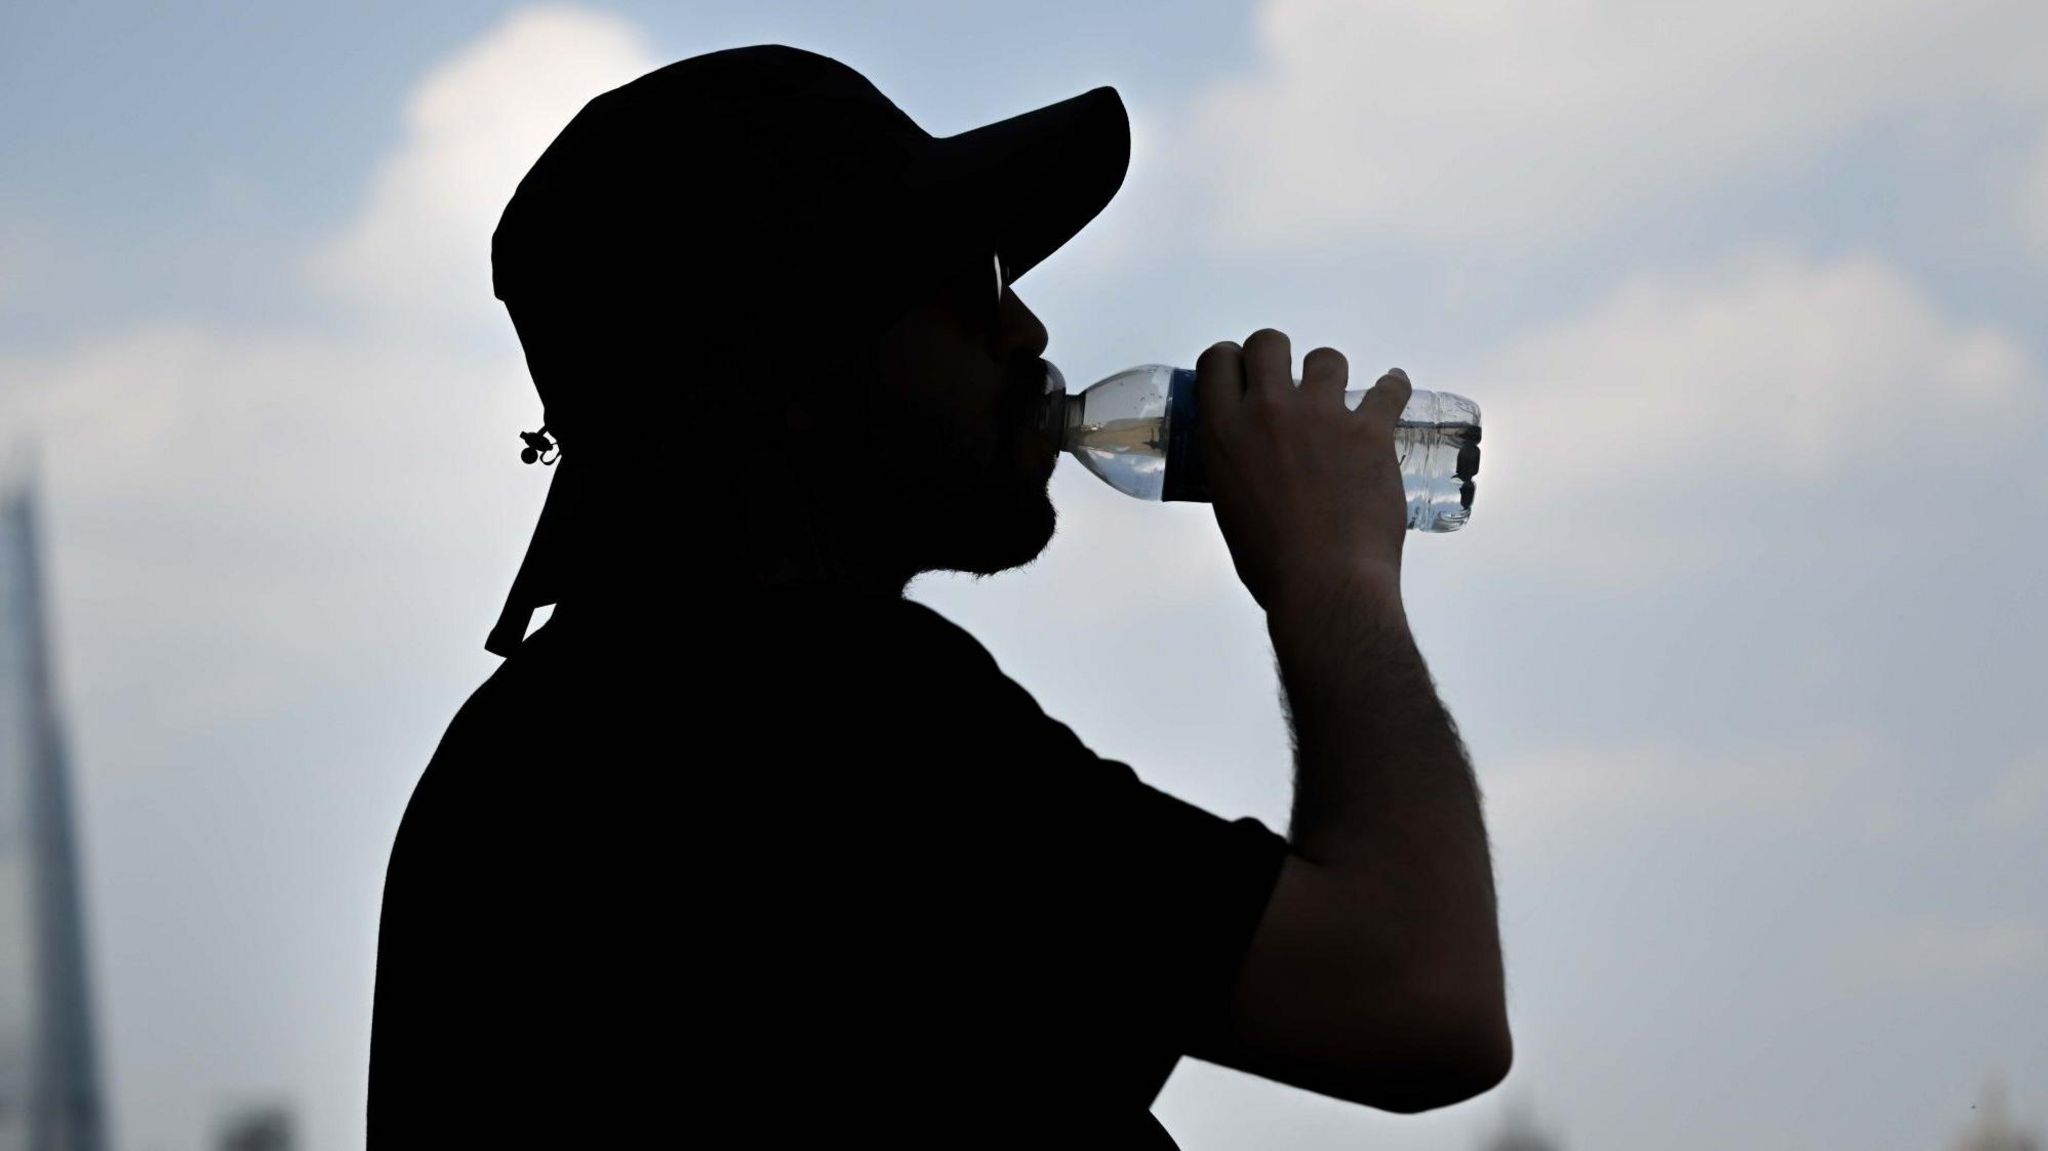 The head and shoulders of a man in silhouette drinking from a bottle of water on a hot day. He is wearing a cap and sunglasses against a blue sky.